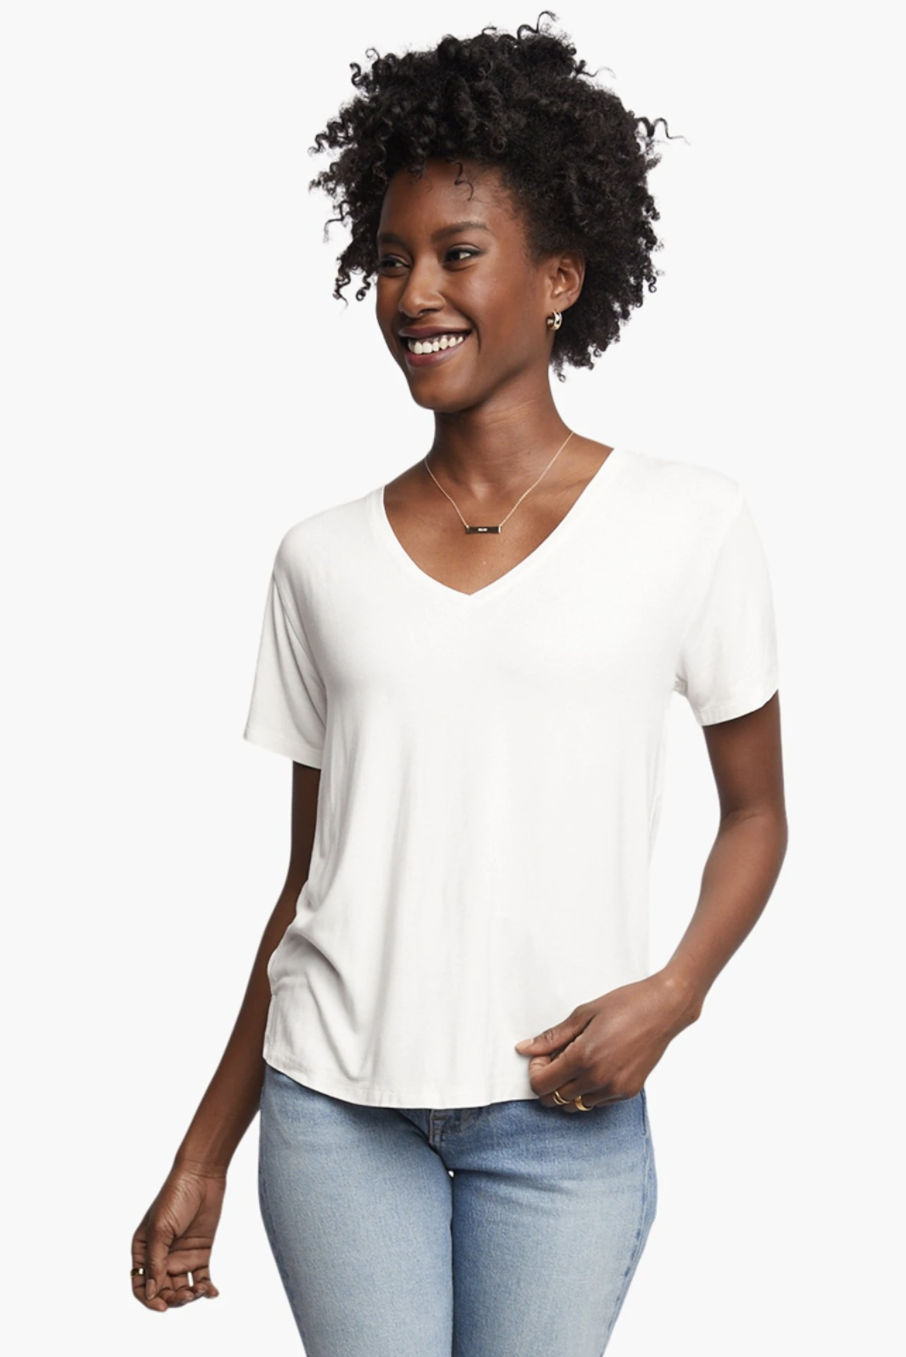 V-Neck T-Shirts for Women in 2023 - Cute V-Neck Tees